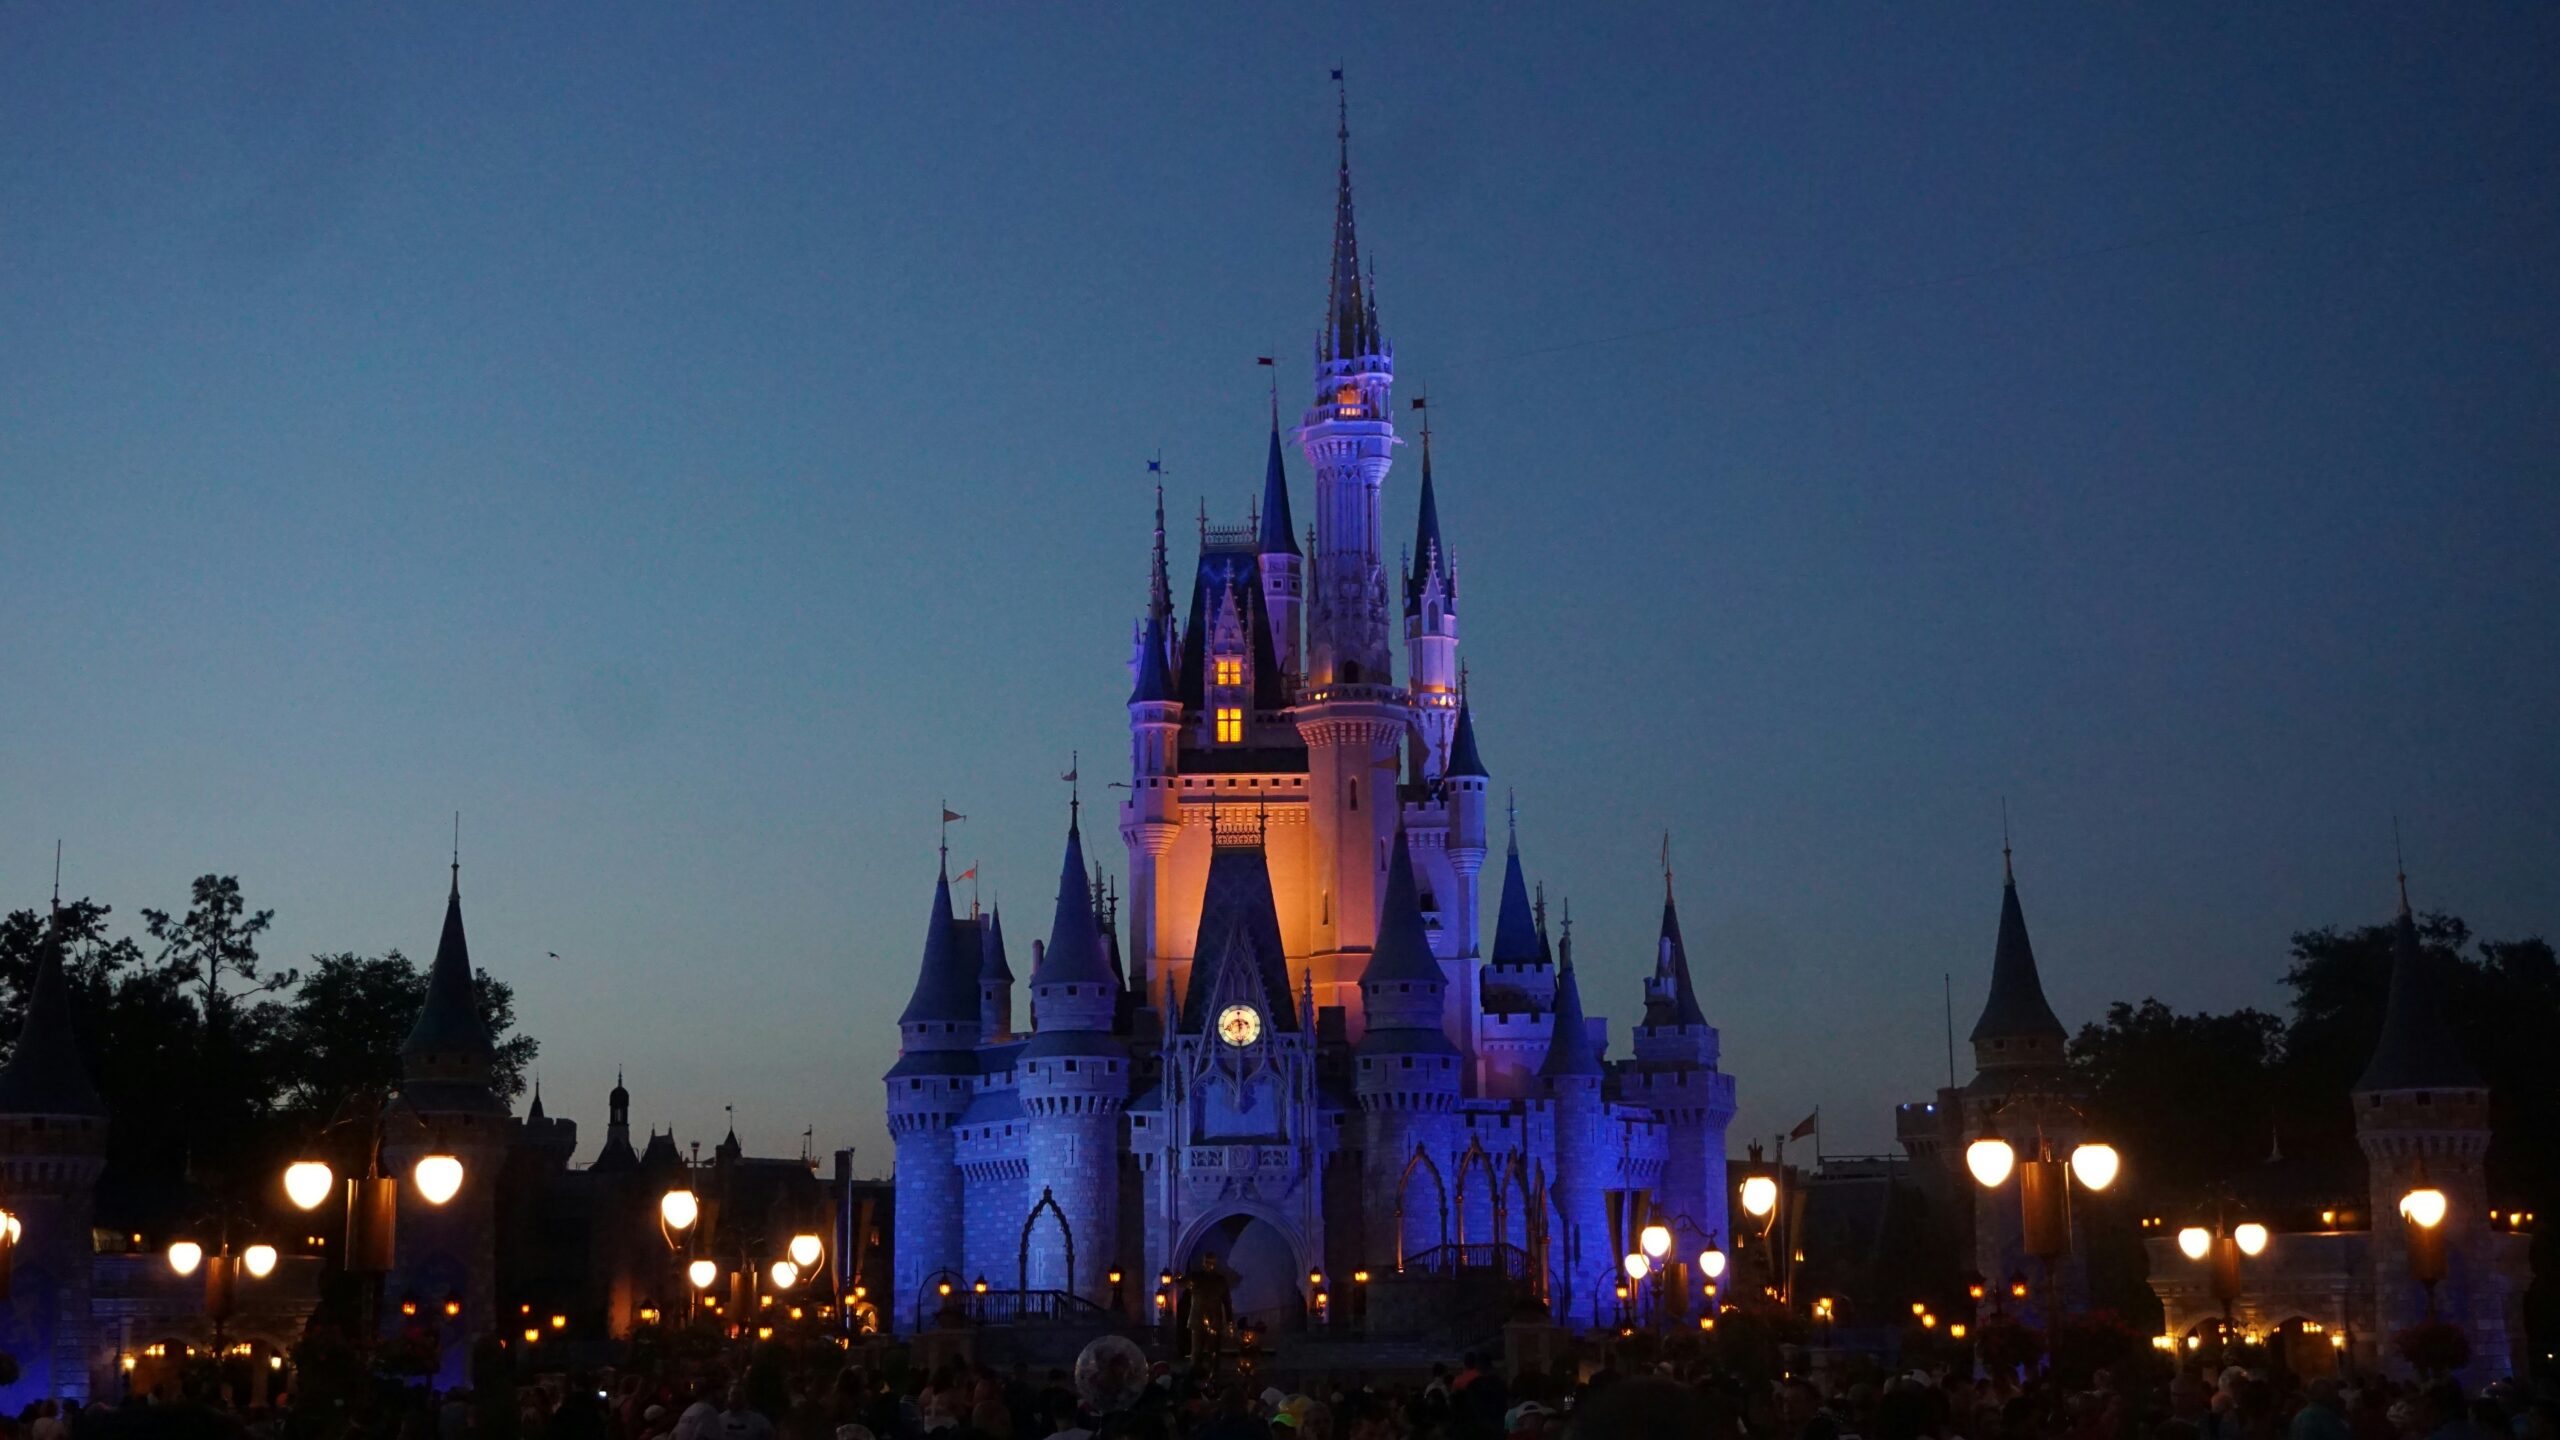 A photograph at dusk of Disney Castle lit up in blue and orange.